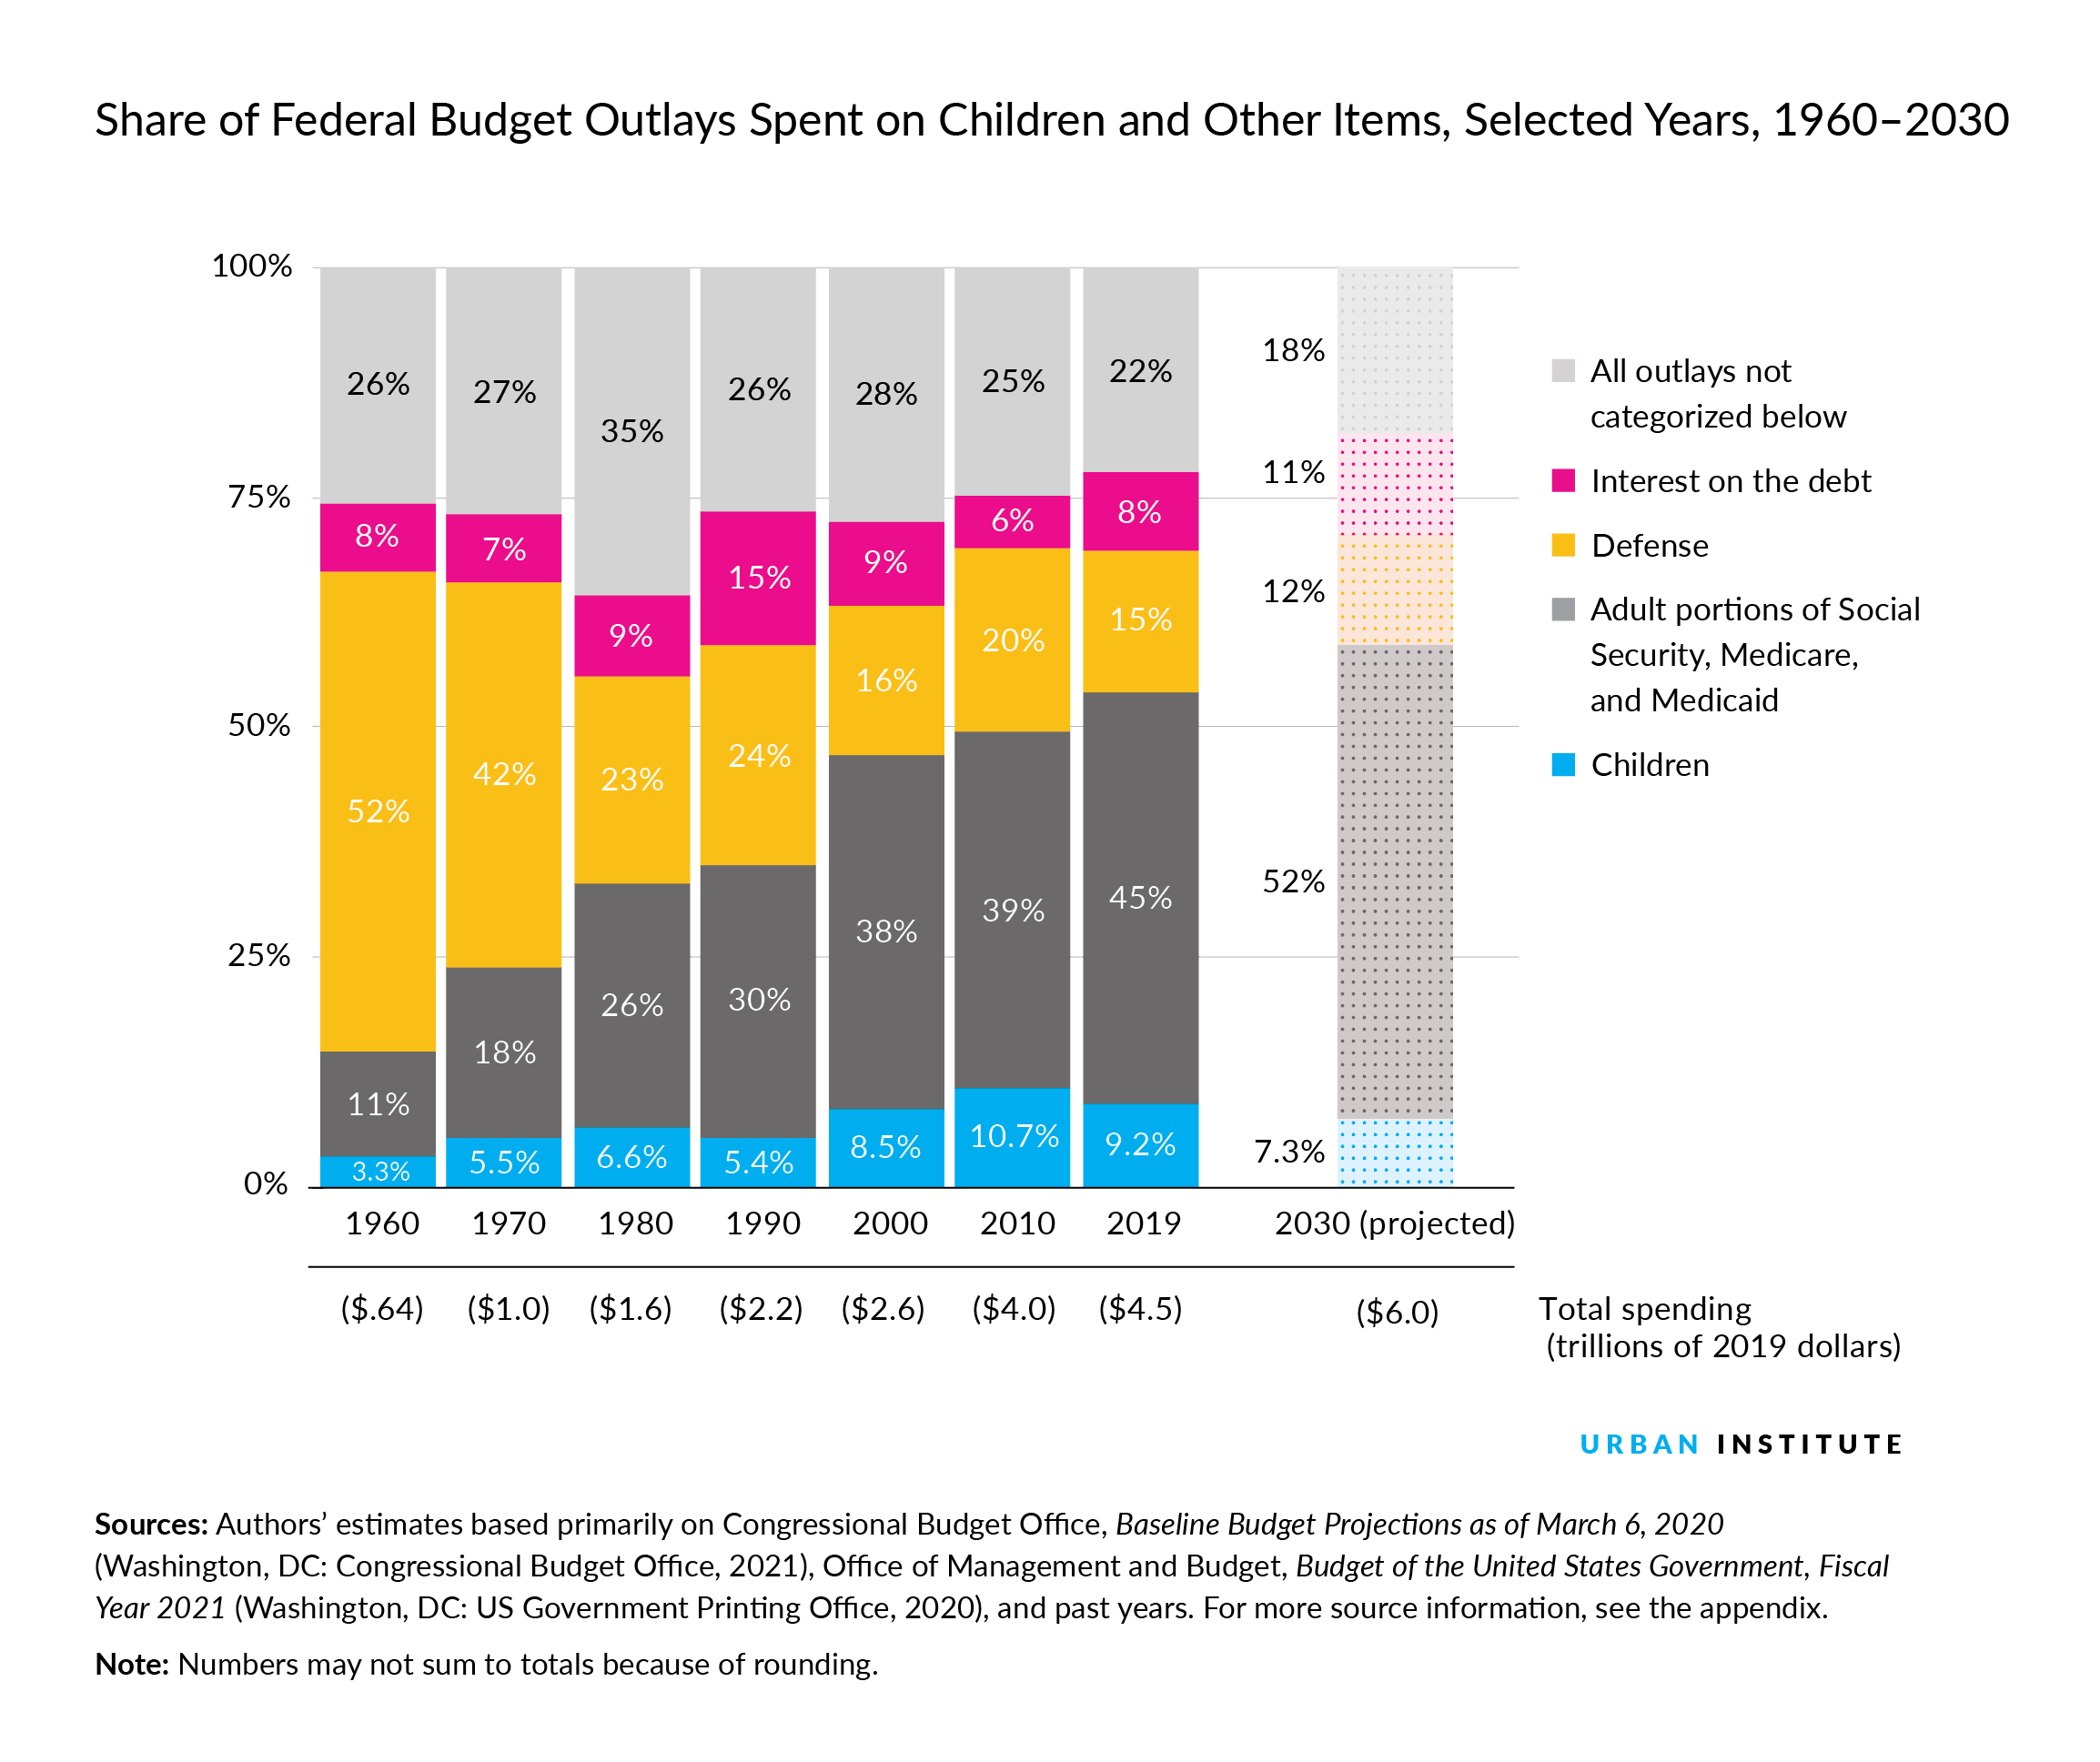 Share of federal budget outlays spent on children and more